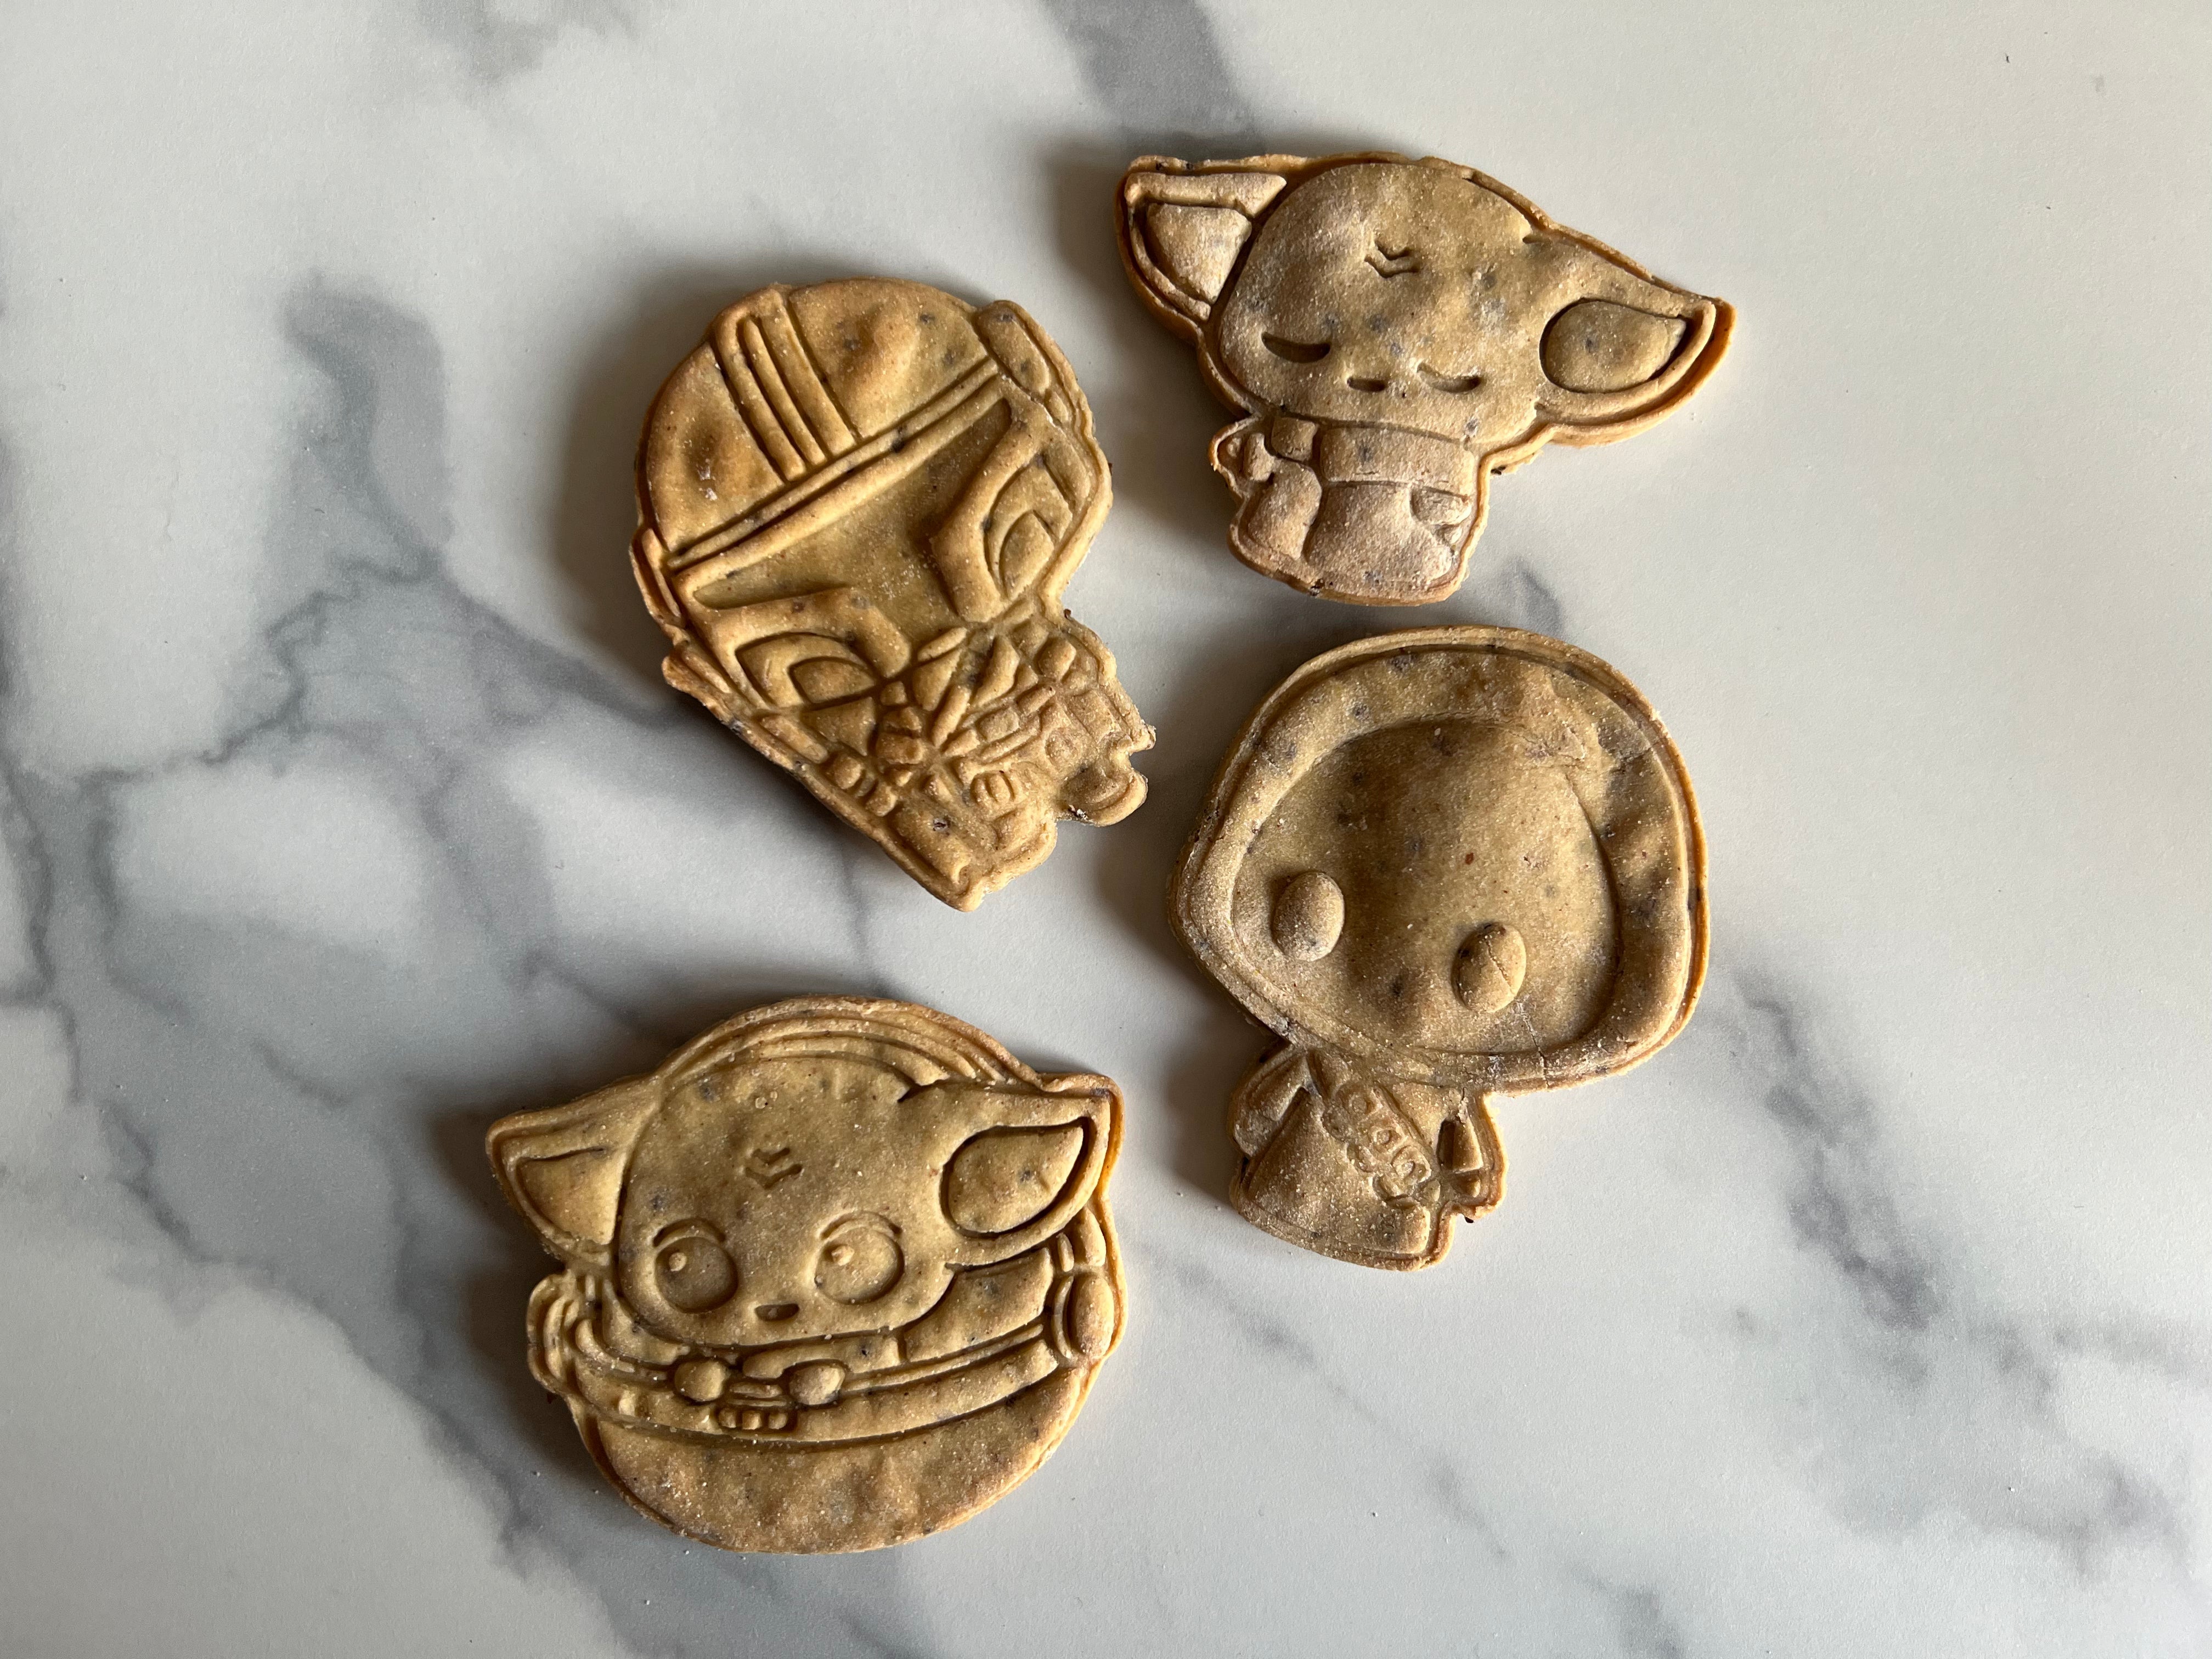 THE MANDALORIAN BISCUITS